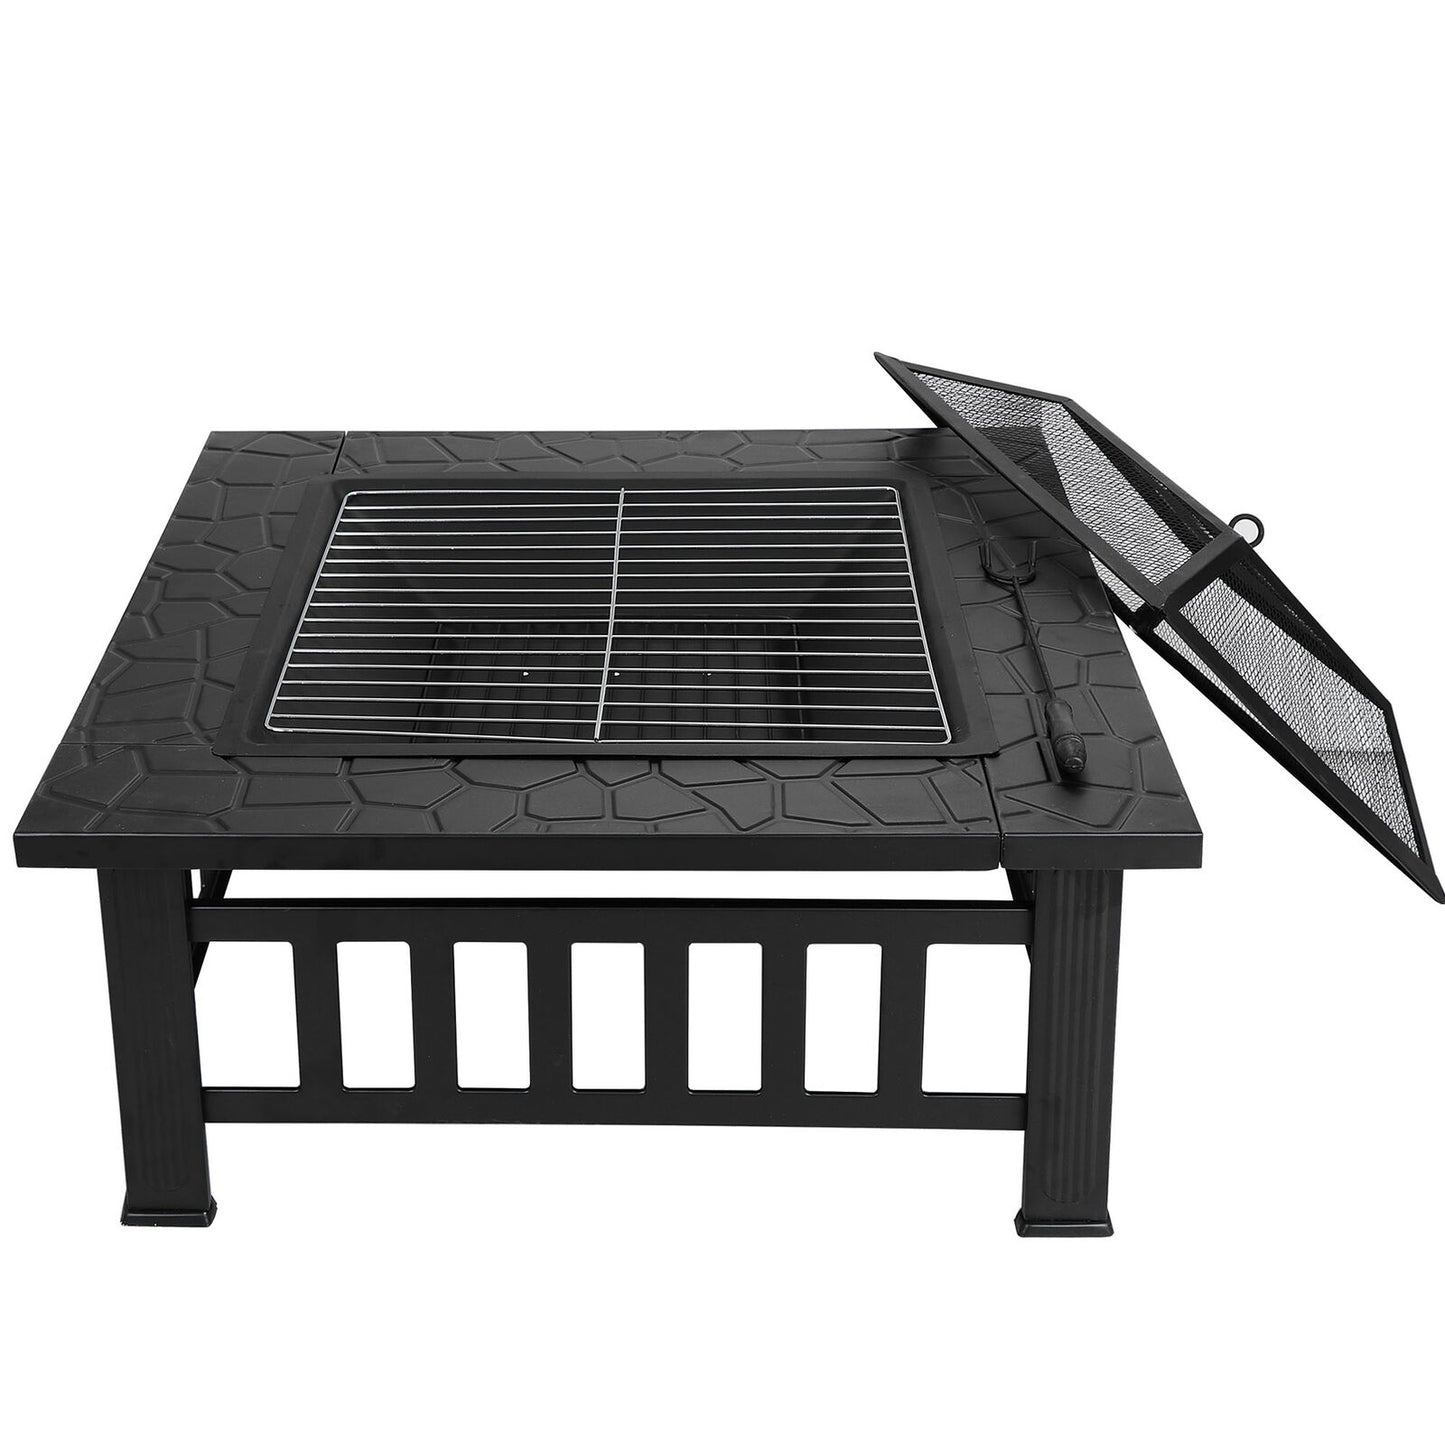 32"Wood Fire Pit Square Metal Backyard Patio Garden Stove W/Cover Outdoor Black